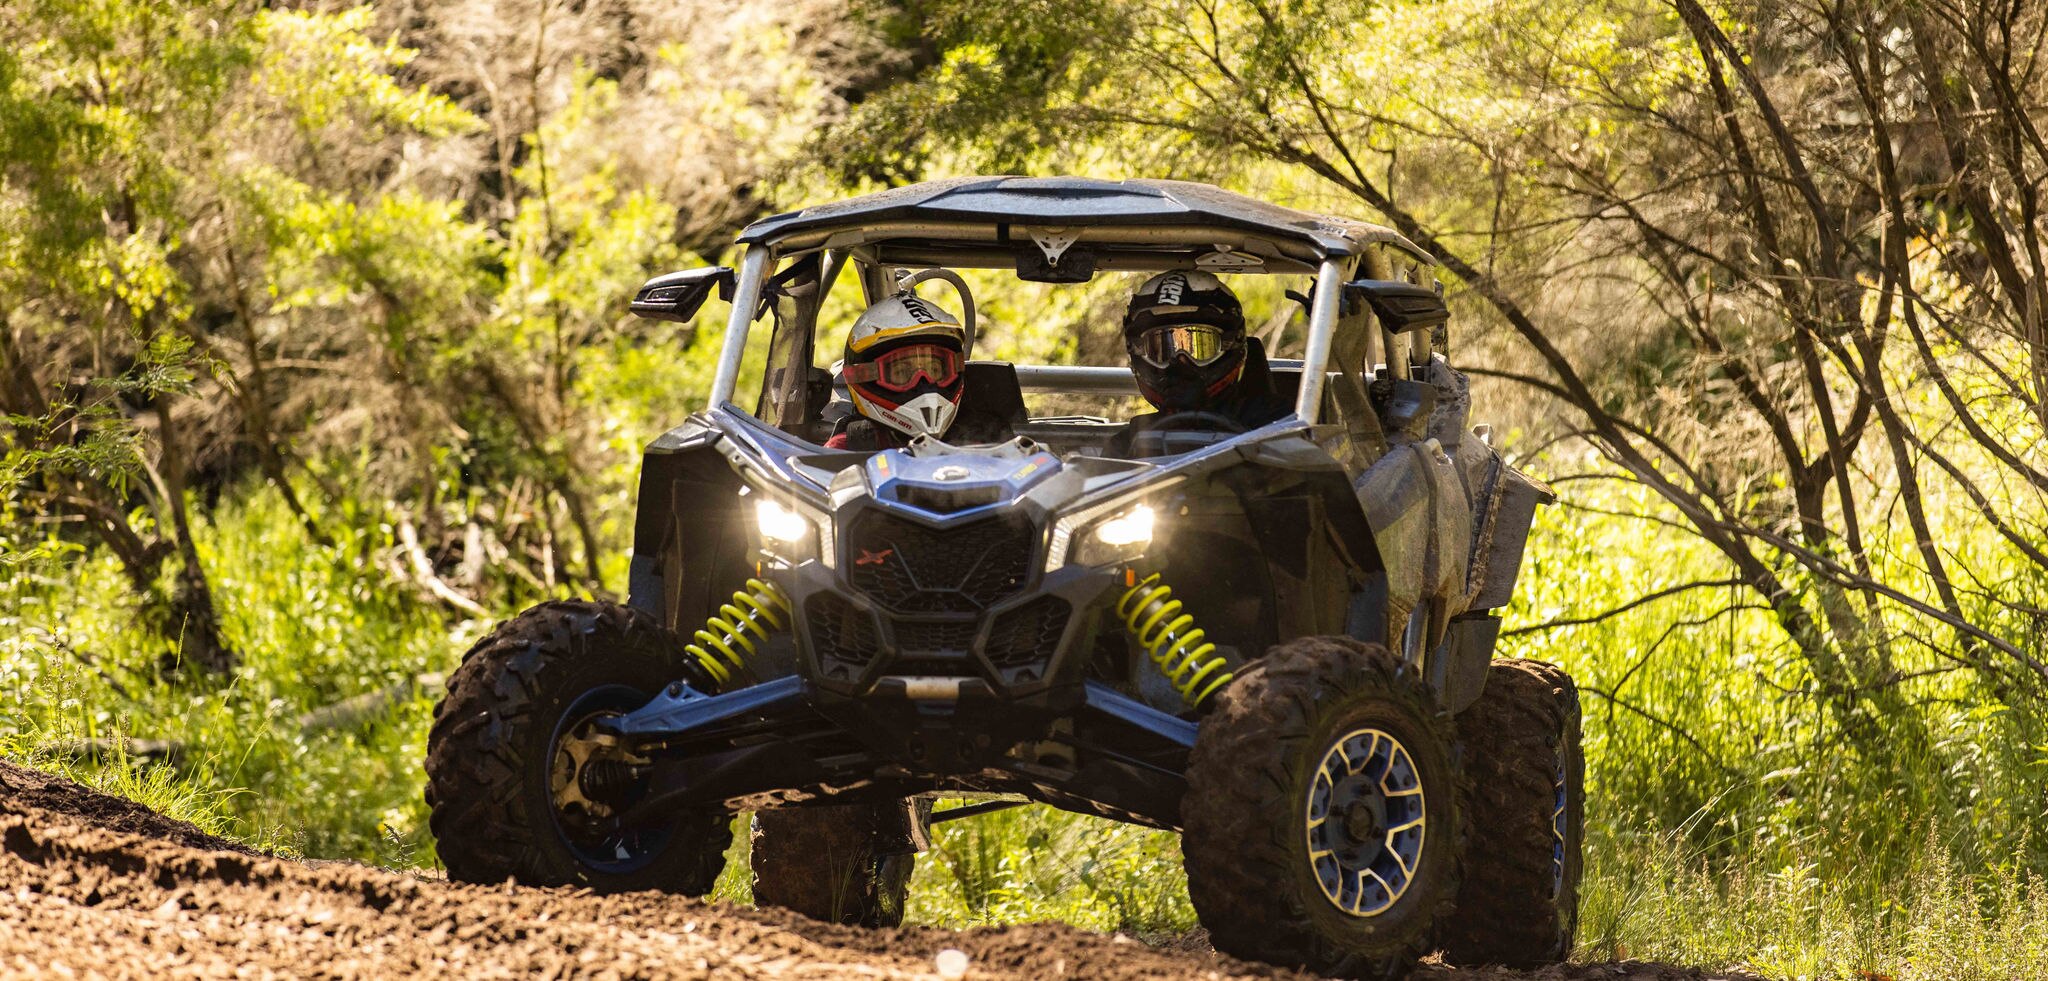 Two persons in a parked Can-Am Off-Road vehicle